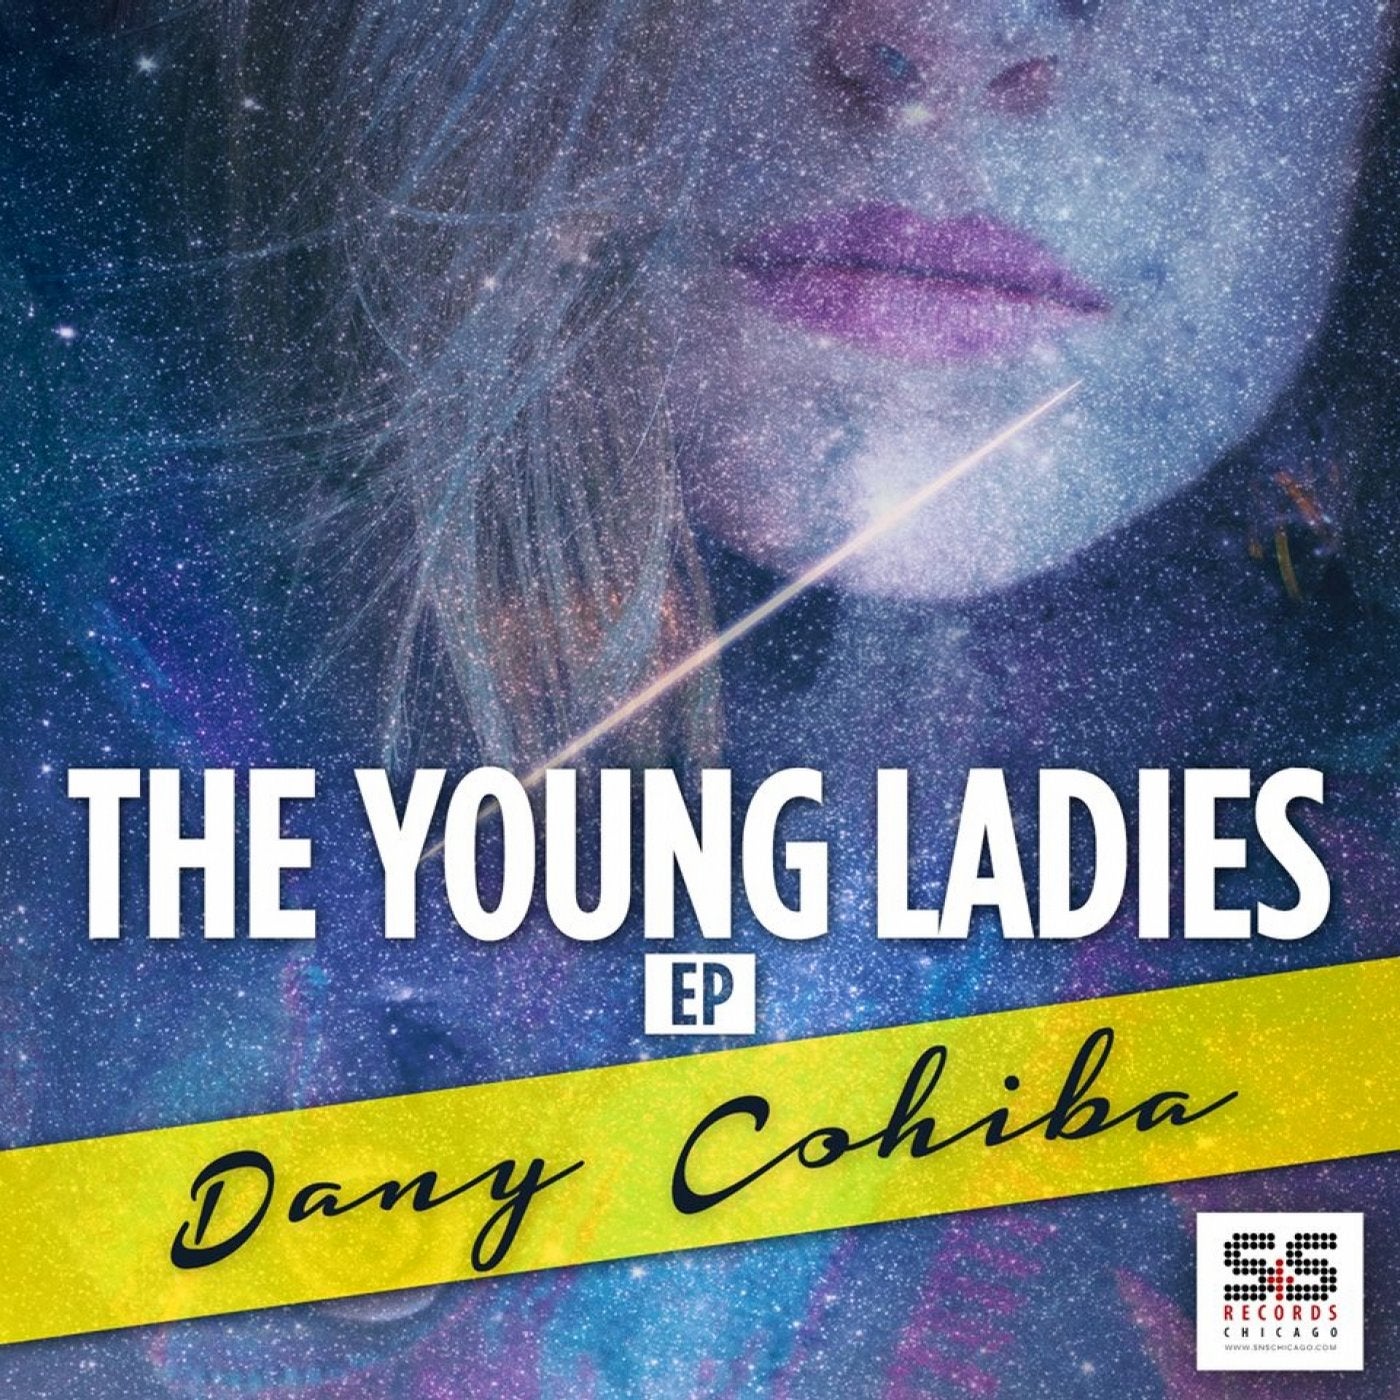 The Young Ladies EP